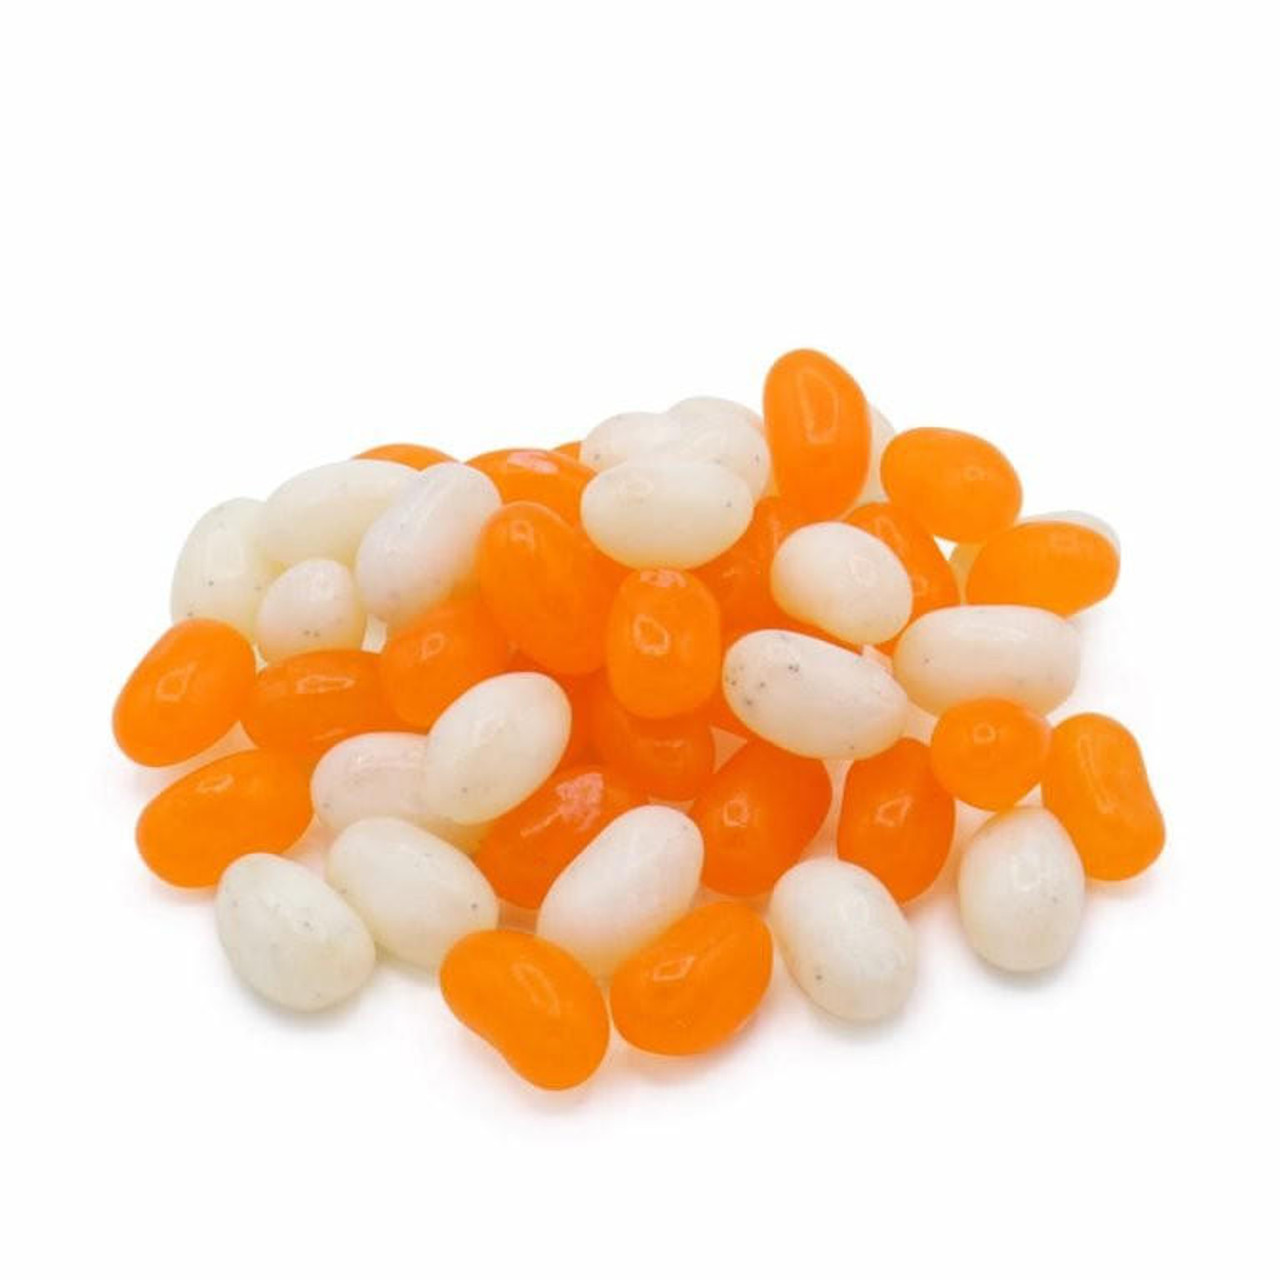 A2ZCHEF Jelly Belly, Orange Cream (Jelly Beans) - 20 lb. Case 